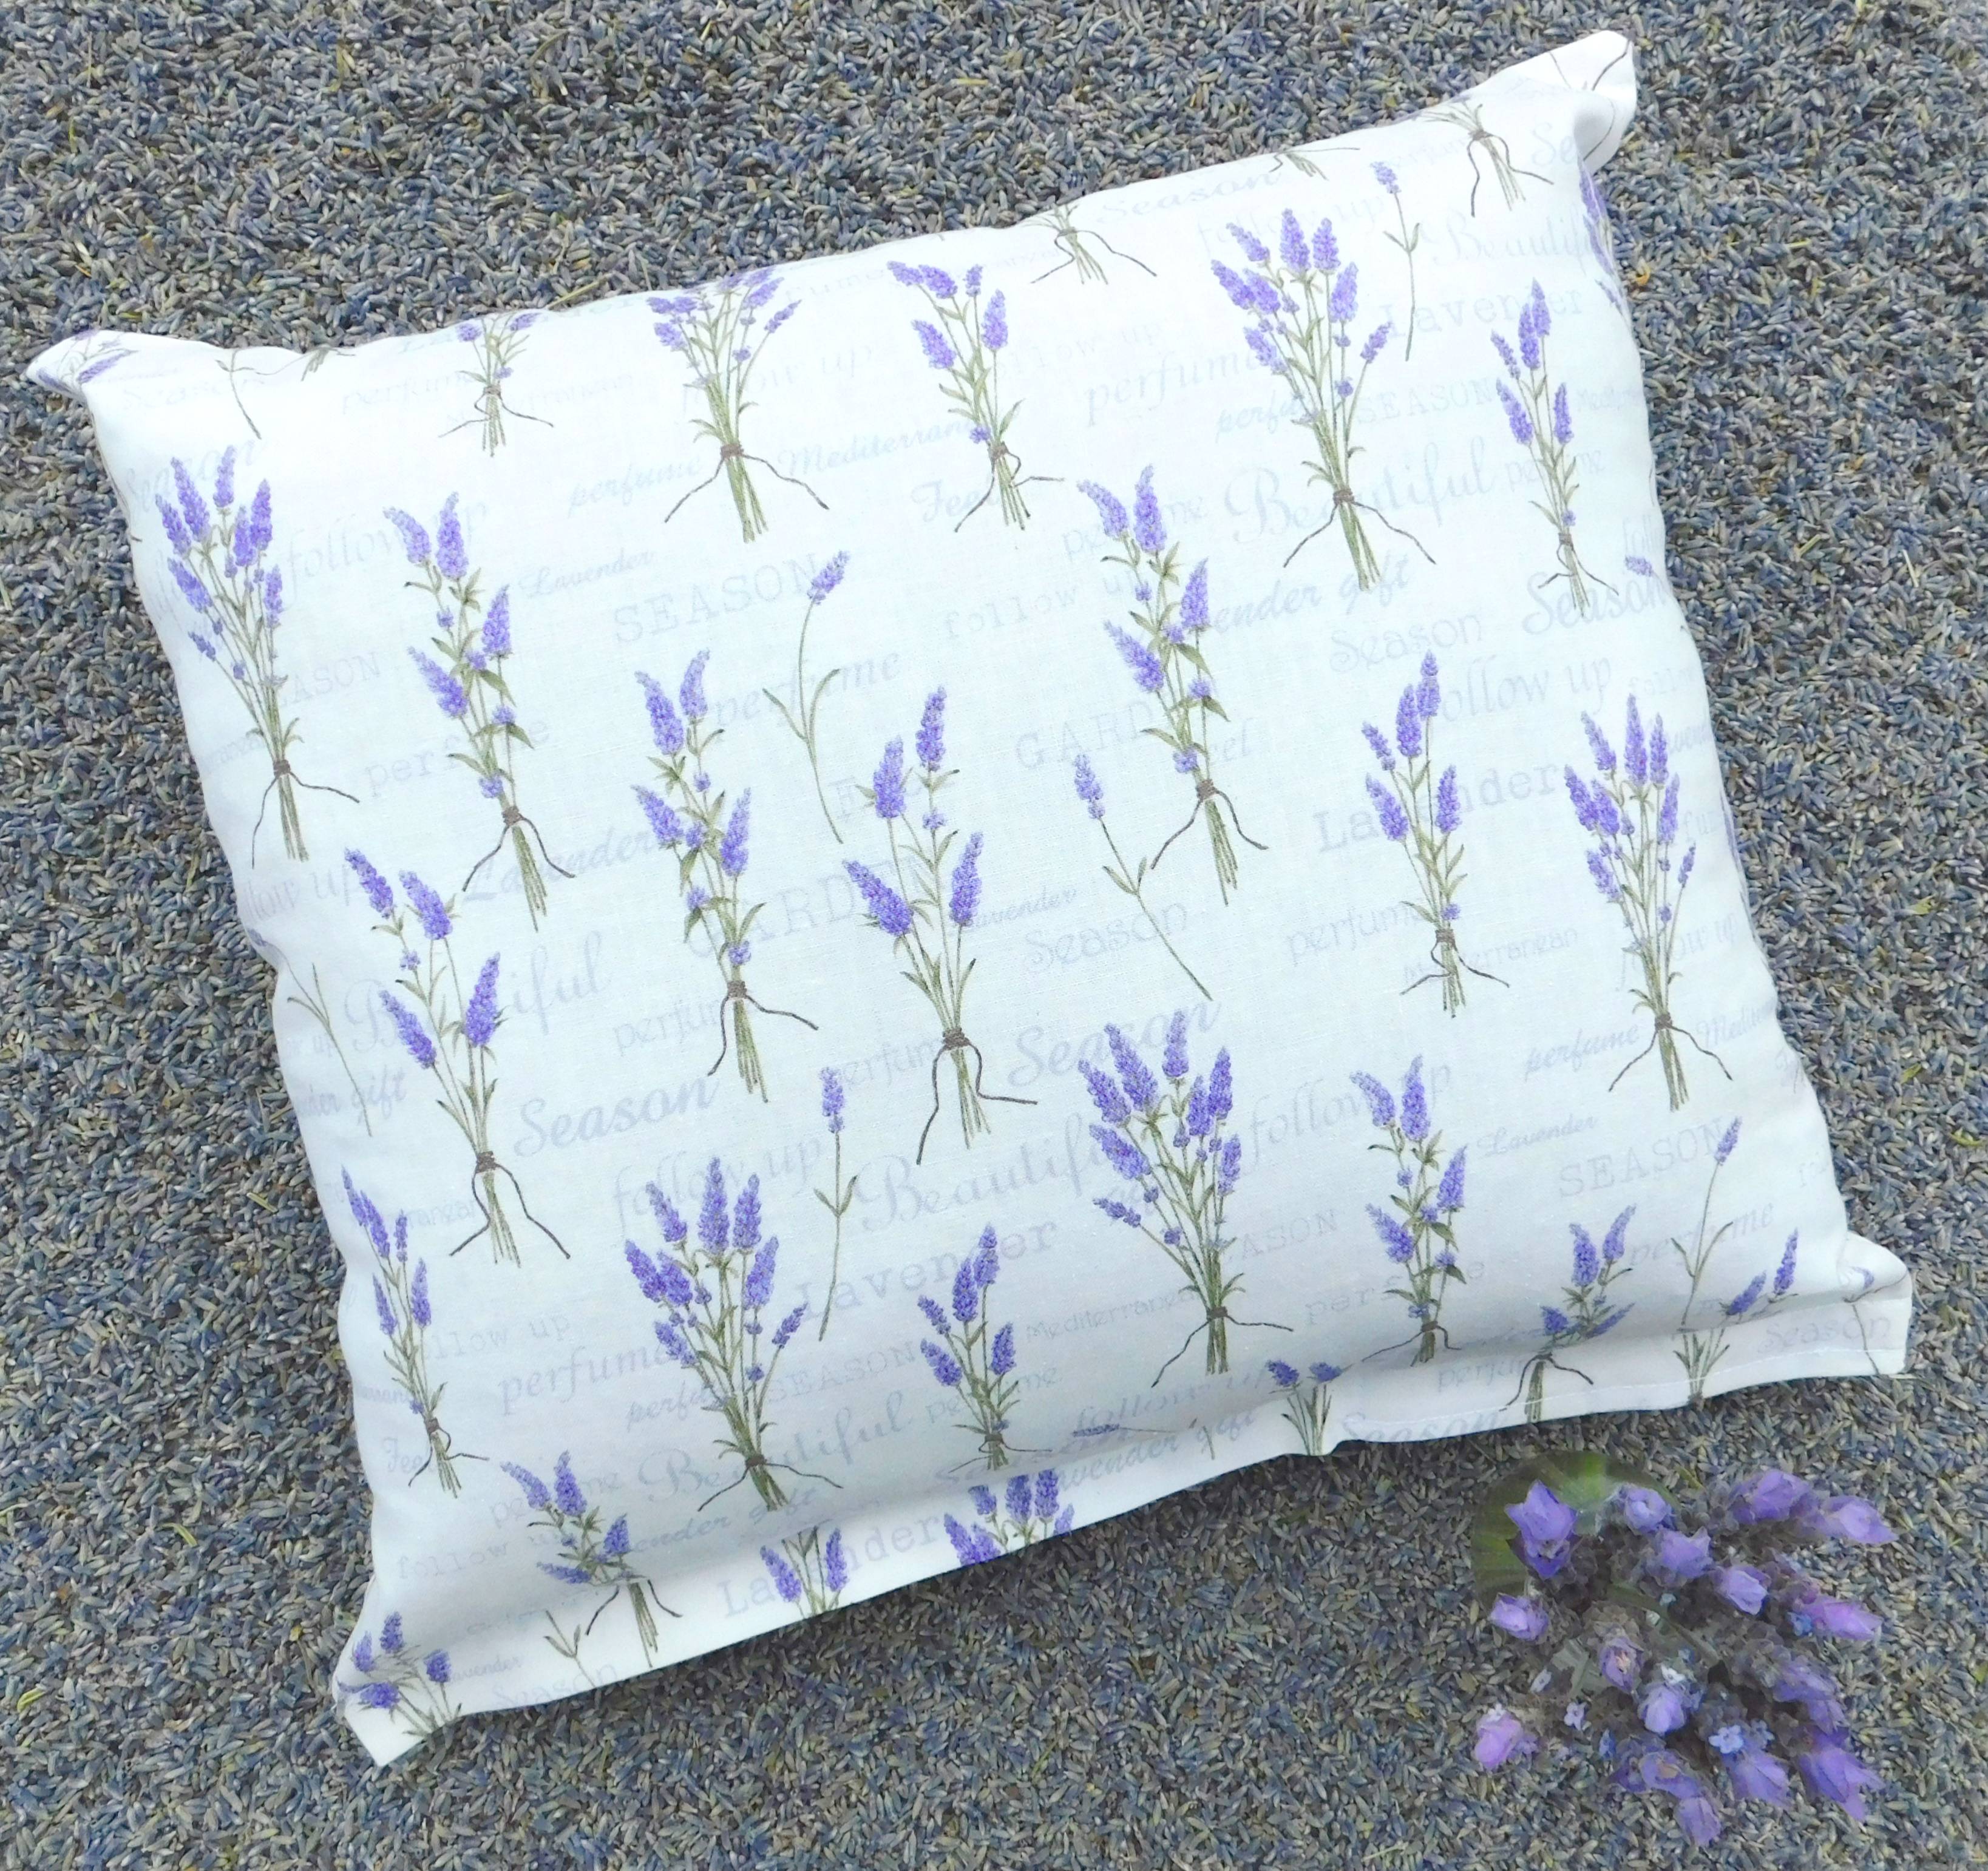 Lavender pillow filled by Lavender Fanatic.